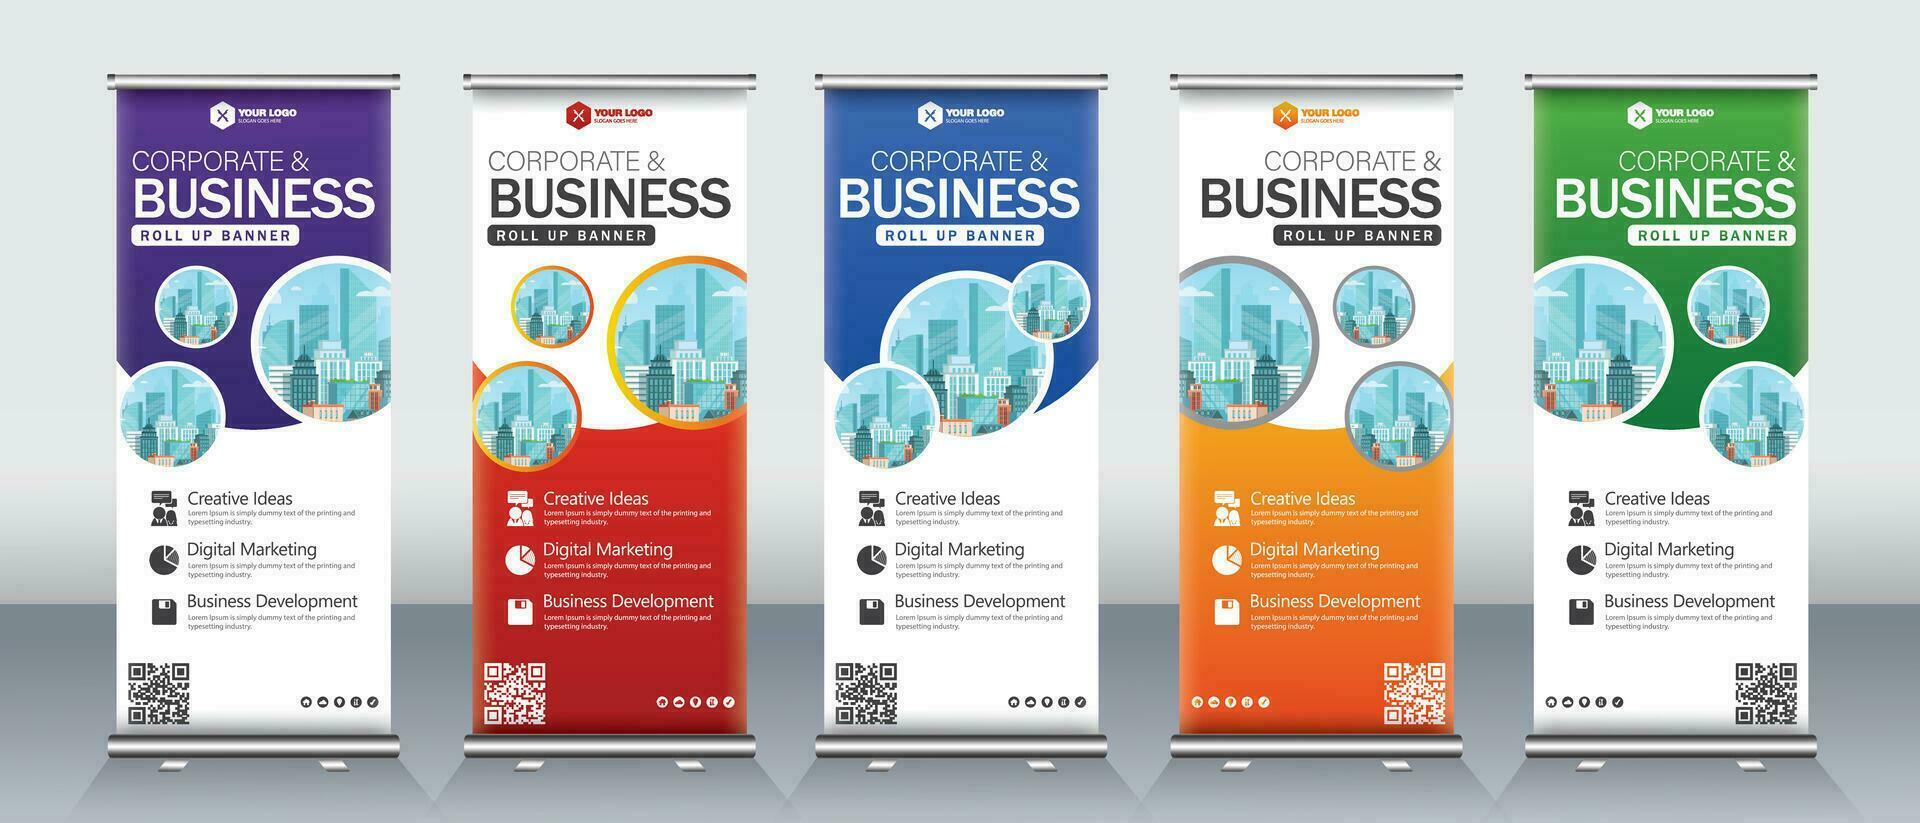 Modern abstract business roll up banner design for meetings, events, presentations vector